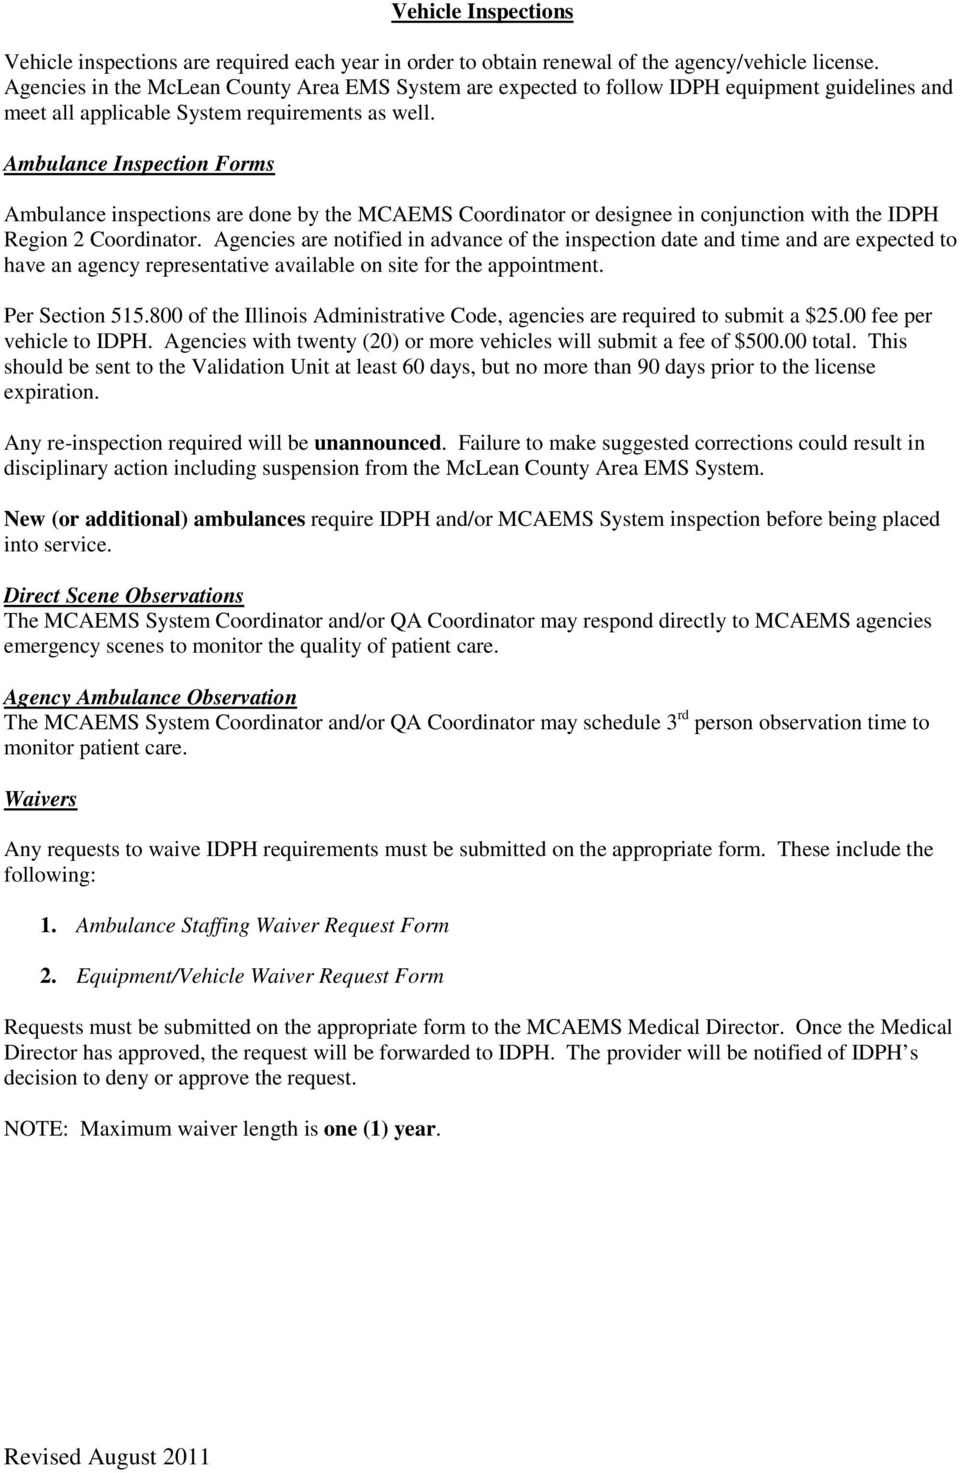 Ambulance Inspection Forms Ambulance inspections are done by the MCAEMS Coordinator or designee in conjunction with the IDPH Region 2 Coordinator.